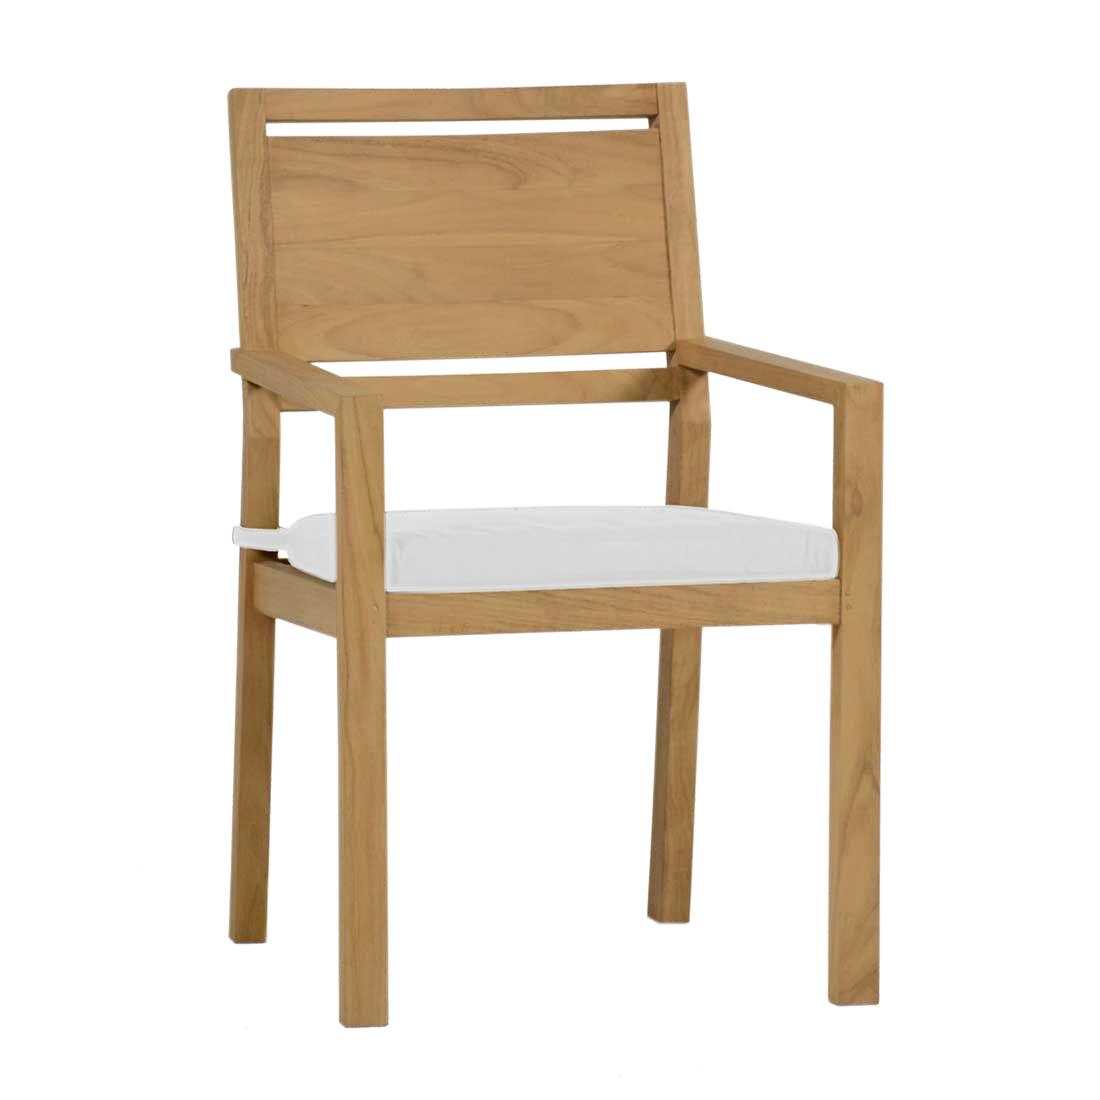 avondale teak arm chair in natural teak – frame only product image